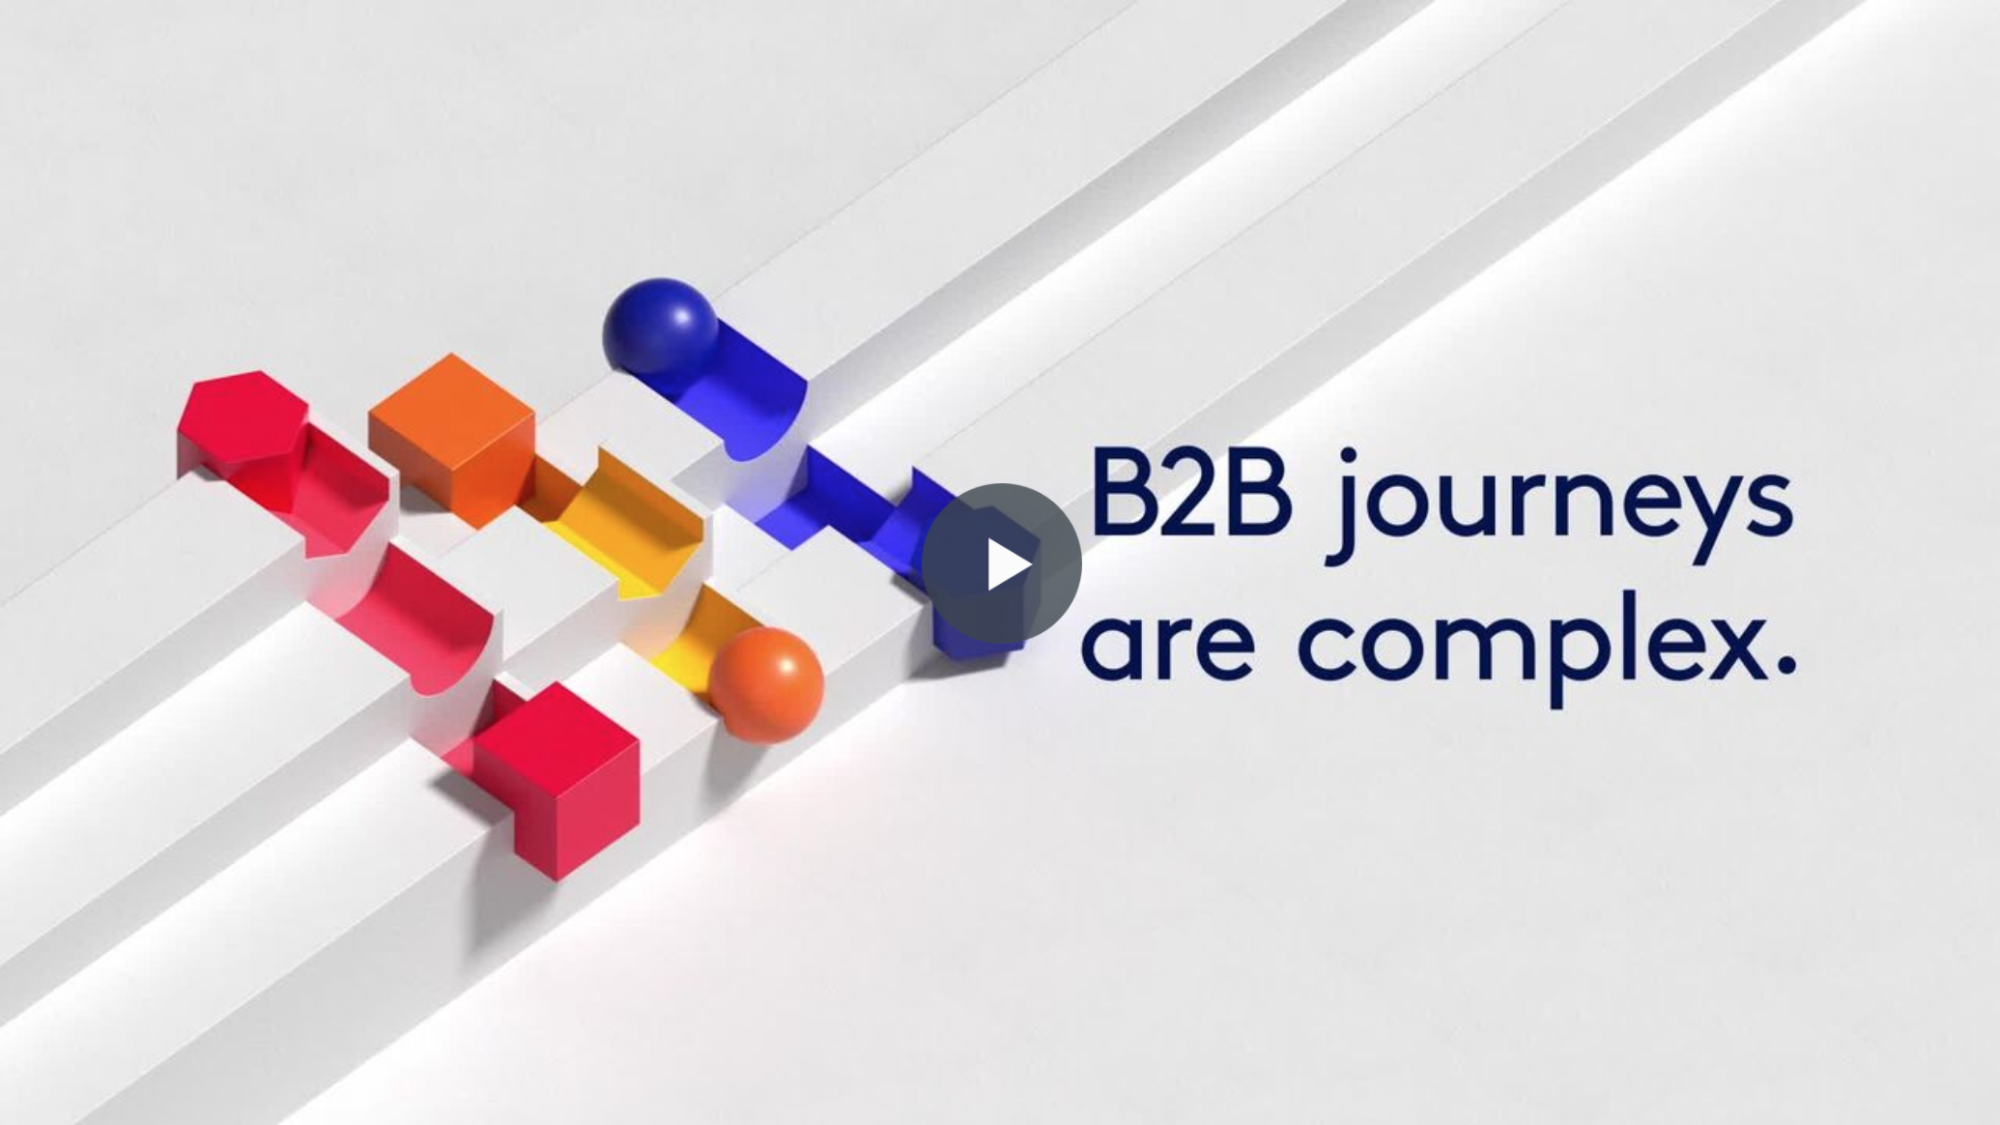 Video thumbnail with the title "B2B journeys are complex" and 3d shapes moving down steps